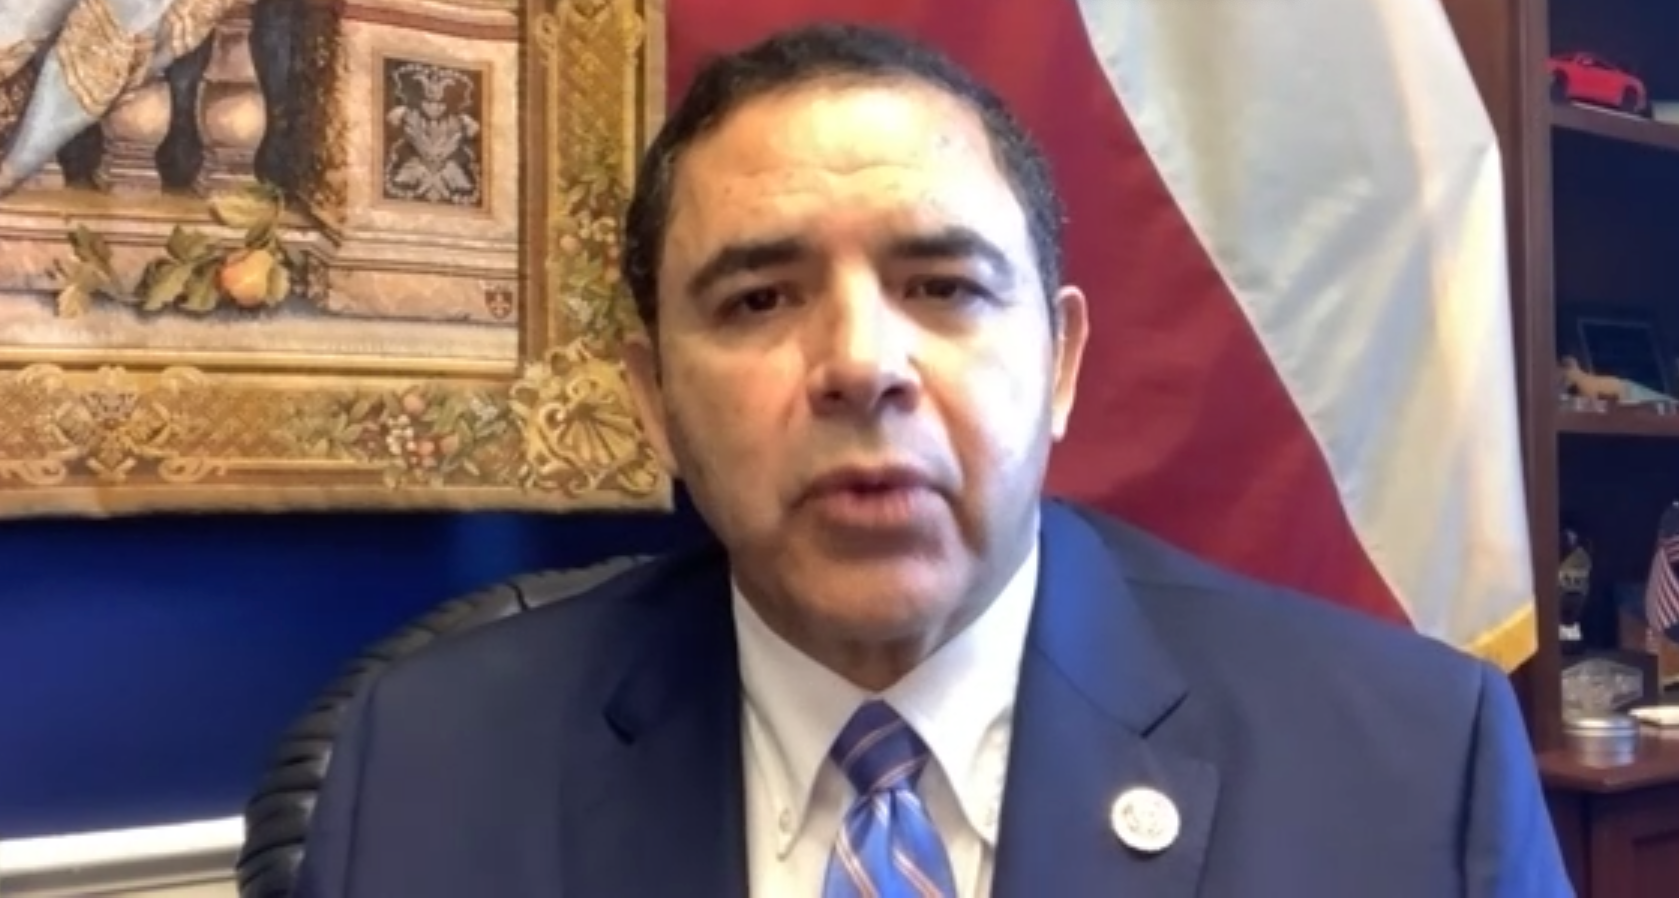 End of Year Updates with U.S. Rep. Cuellar